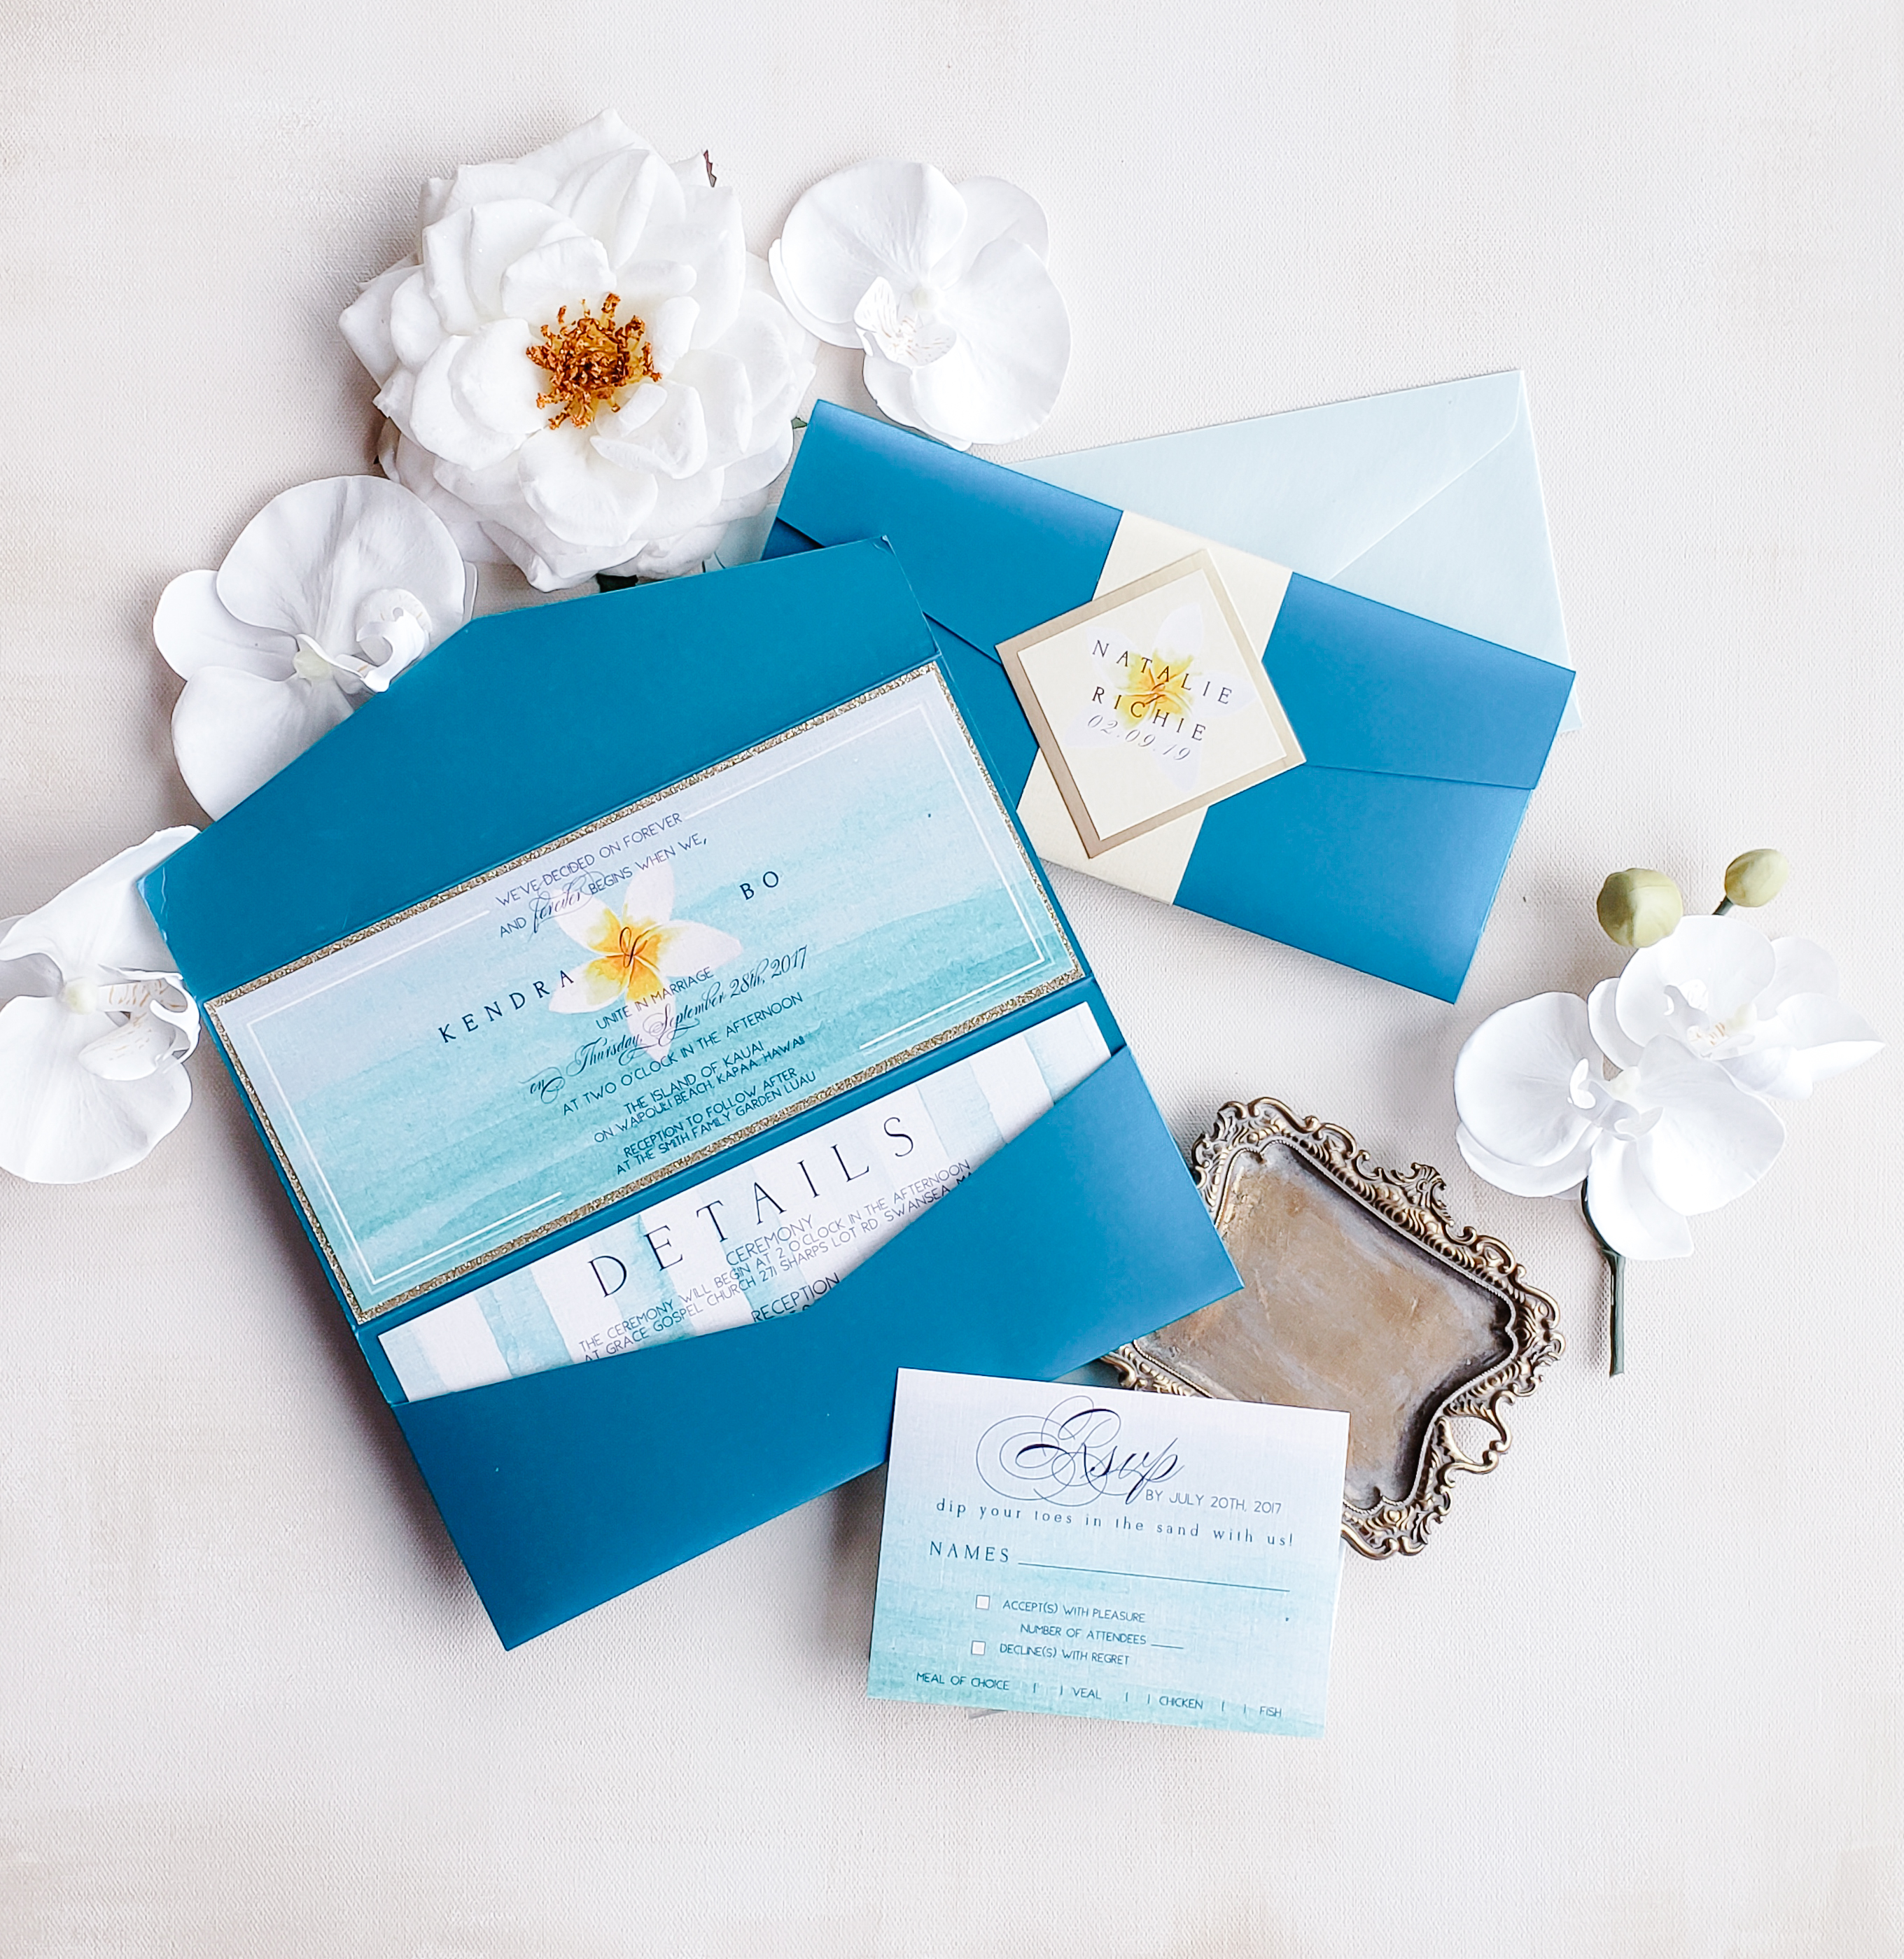 [vc_row][vc_column][vc_column_text]Purchase this listing to get a sample of our Plumeria wedding invitation suite.

The sample includes:

• 9